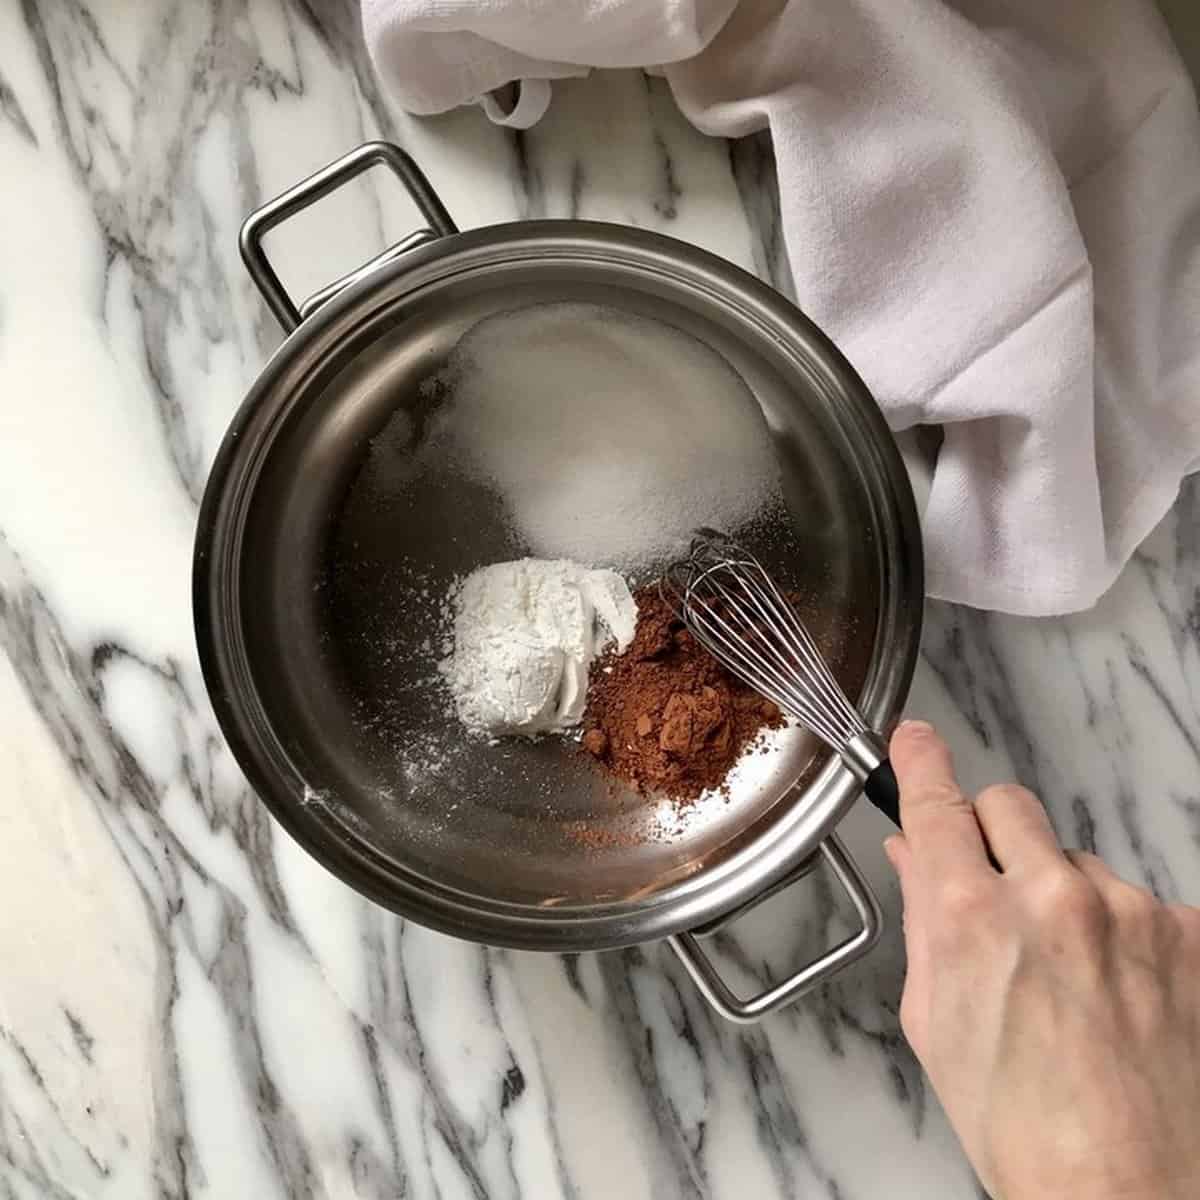 The dry ingredients to make chocolate pudding are whisked together in a saucepan. These include cornstarch, sugar and cocoa powder.